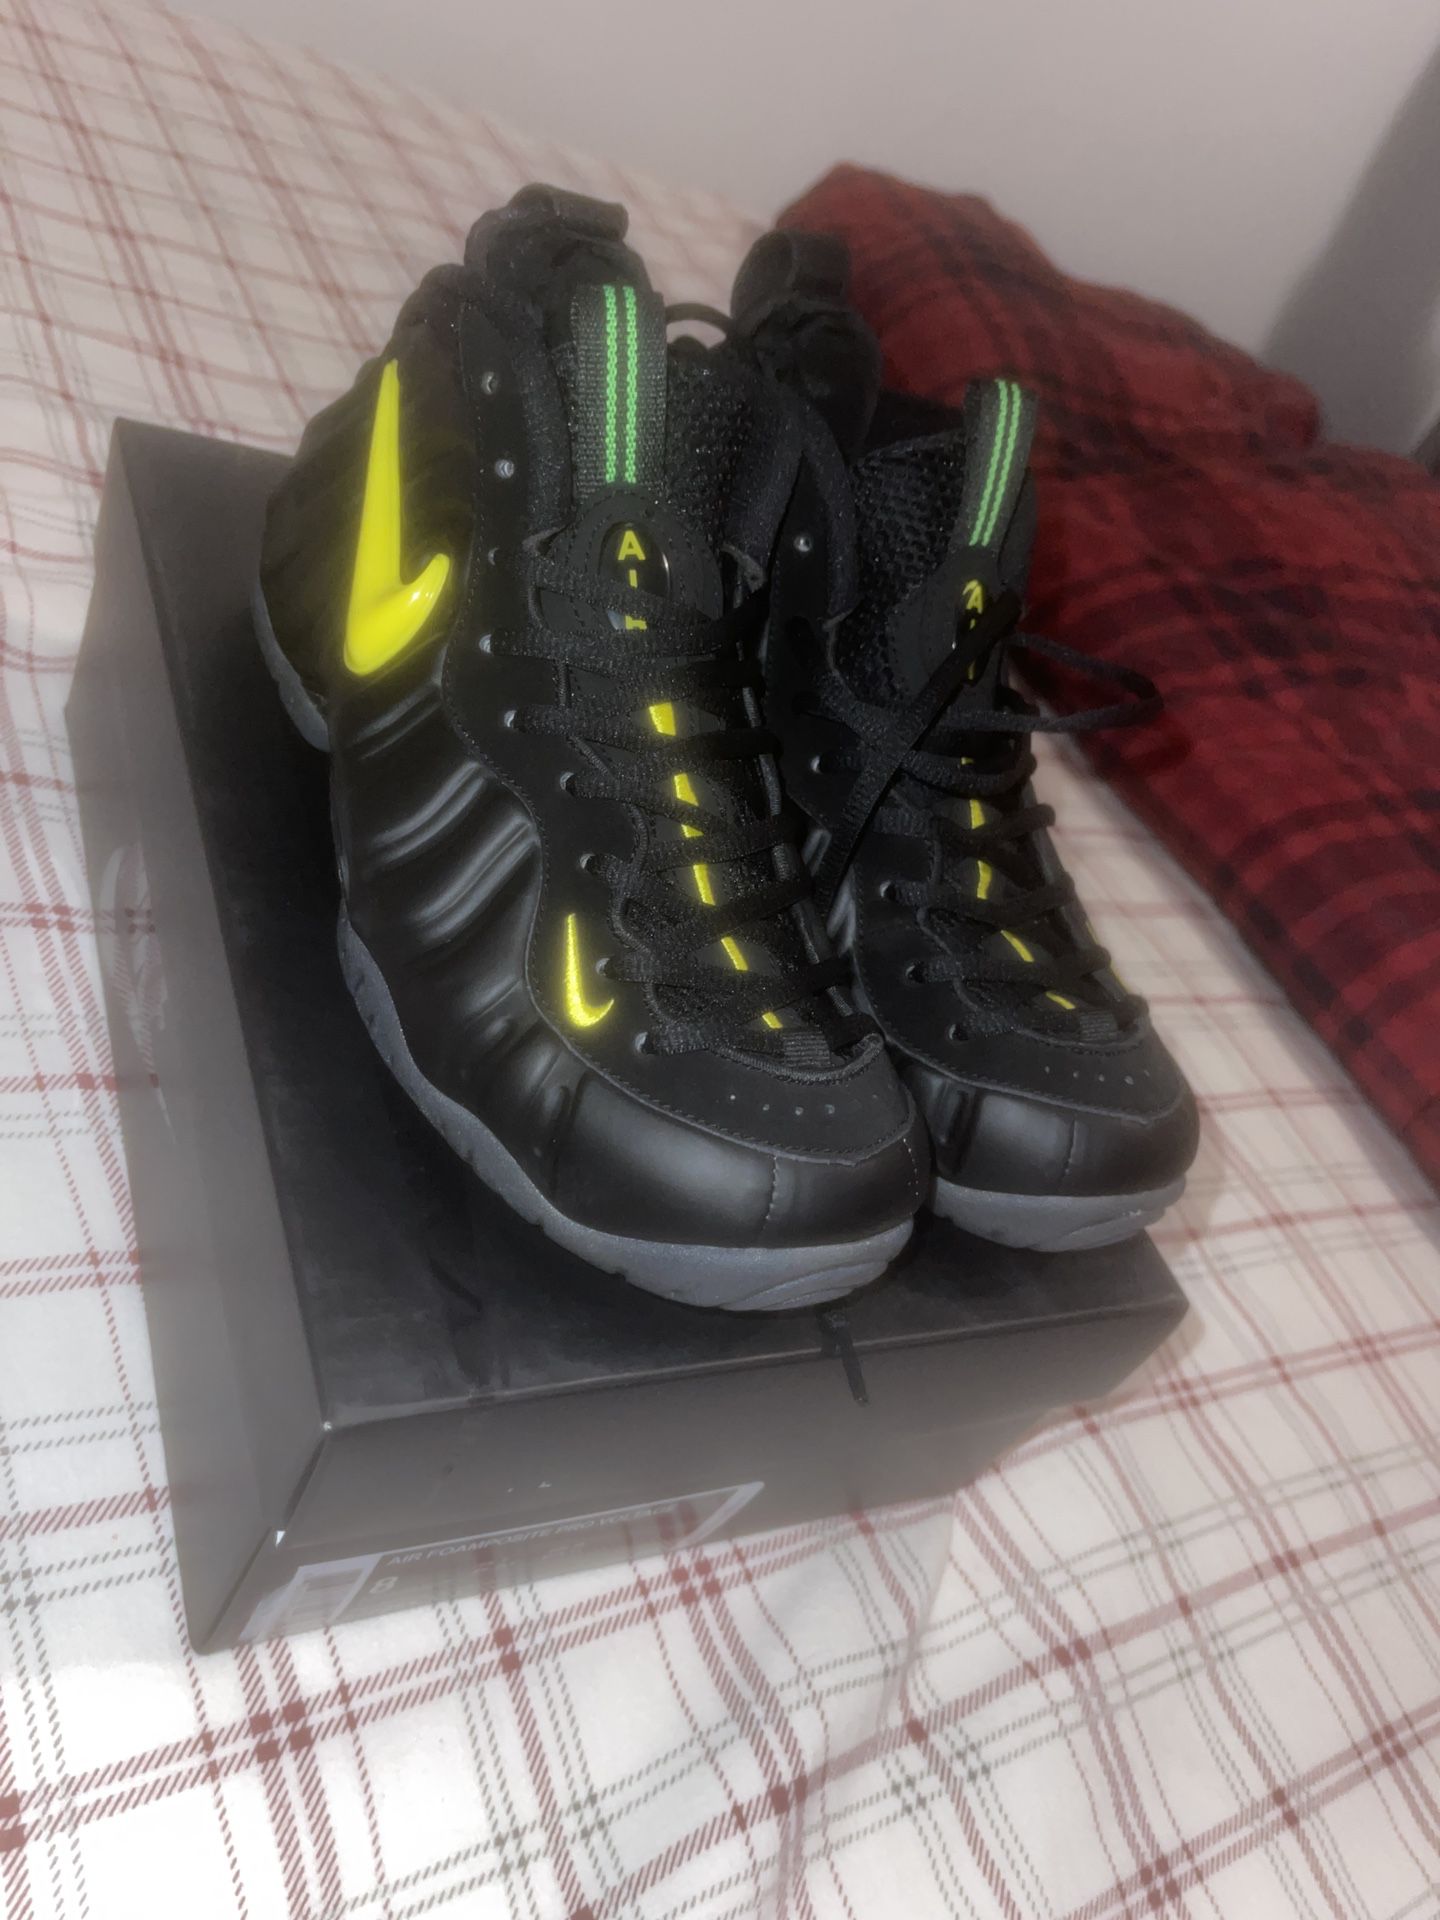 Air Foamposite Pro Voltage Yellow Black Foam for in Queens, NY - OfferUp